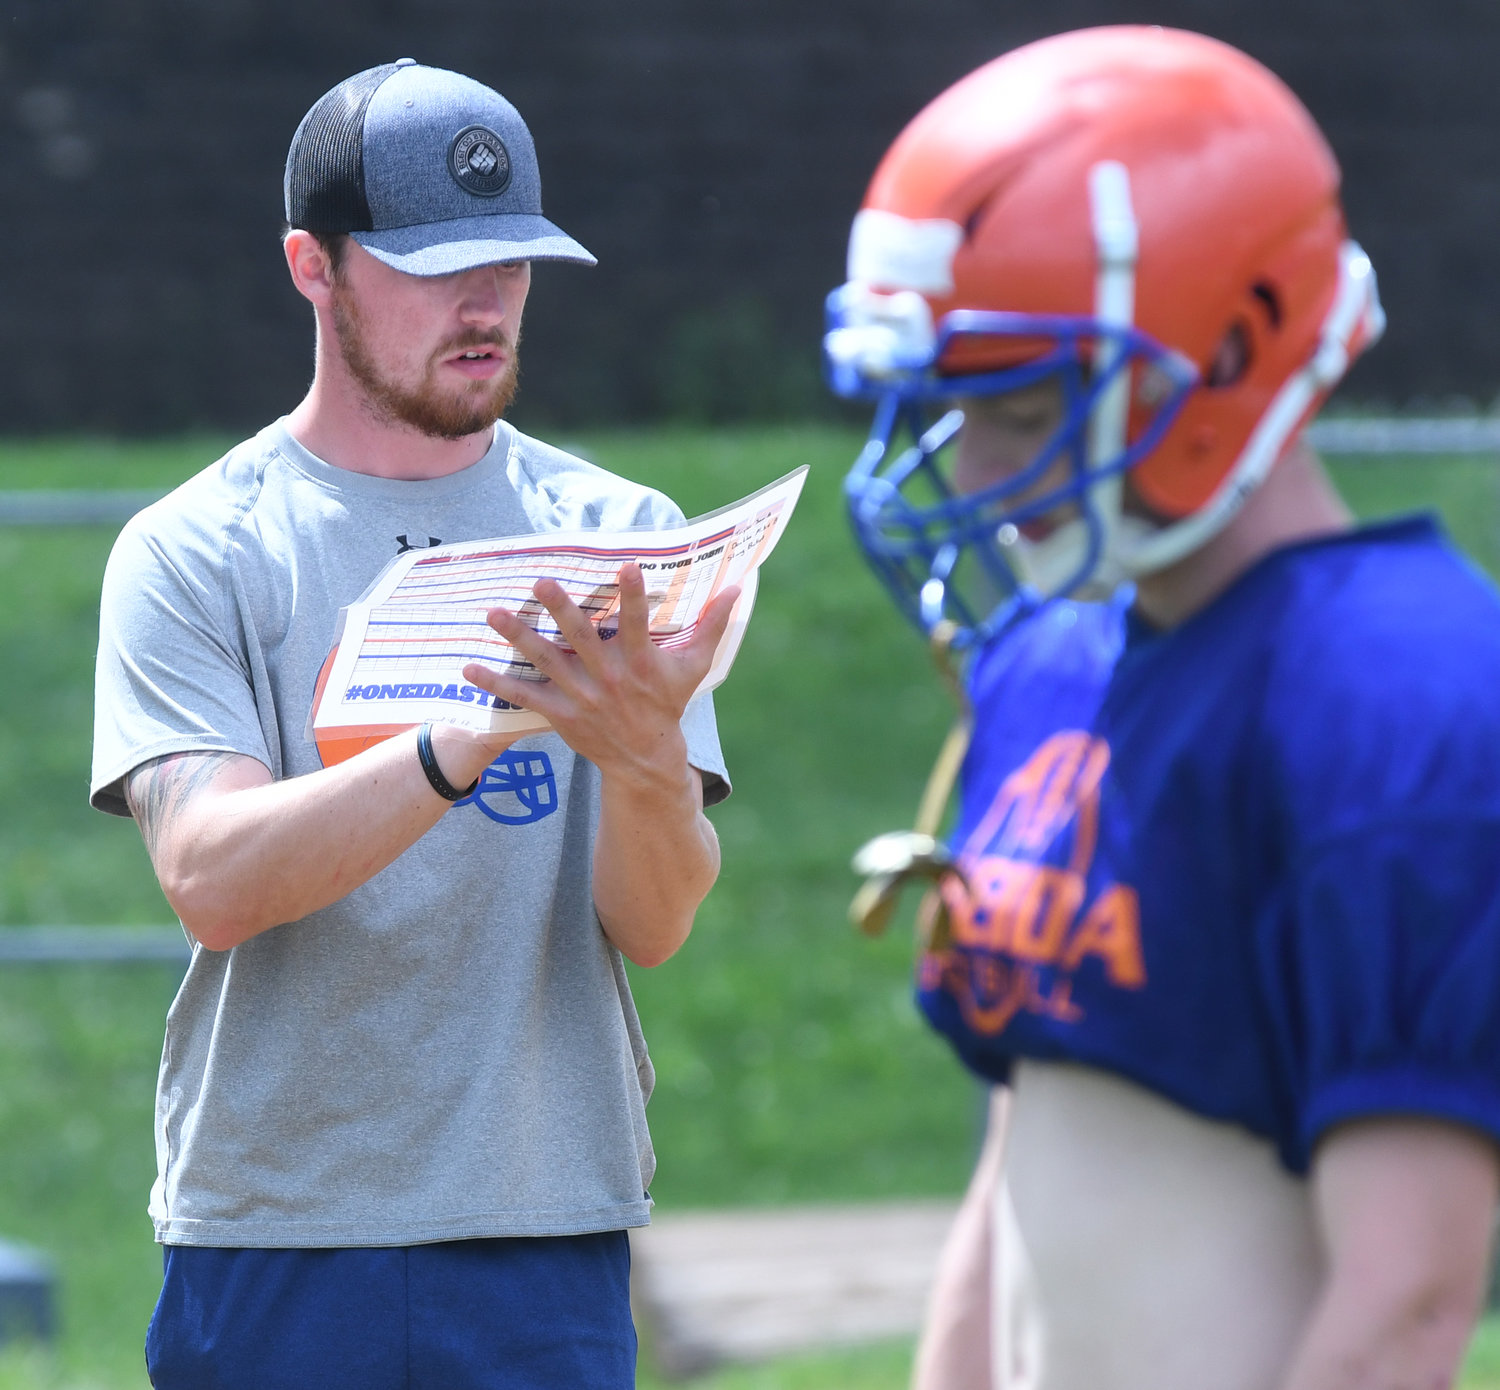 Oneida first-year head coach Matt McCoy reads off a card during preseason practice. The former Vernon-Verona-Sherrill player was a defensive back at then-Utica College and later coached on the defensive staff there. Now he’s trying to lead the Oneida team back from being 2-3 in the spring 2020-21 season and 3-5 last fall.